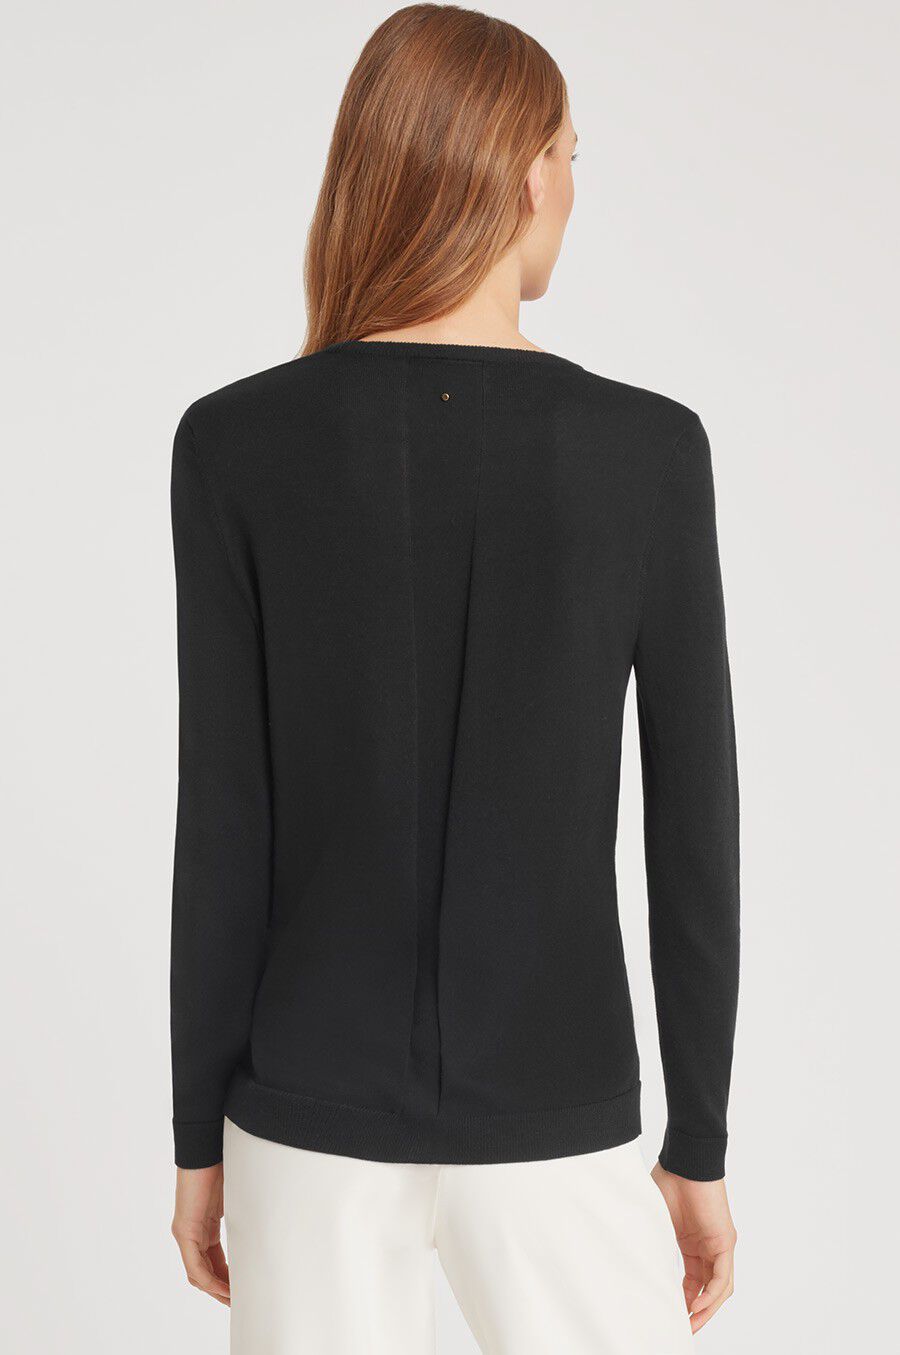 Woman wearing a long-sleeve top, viewed from the back.